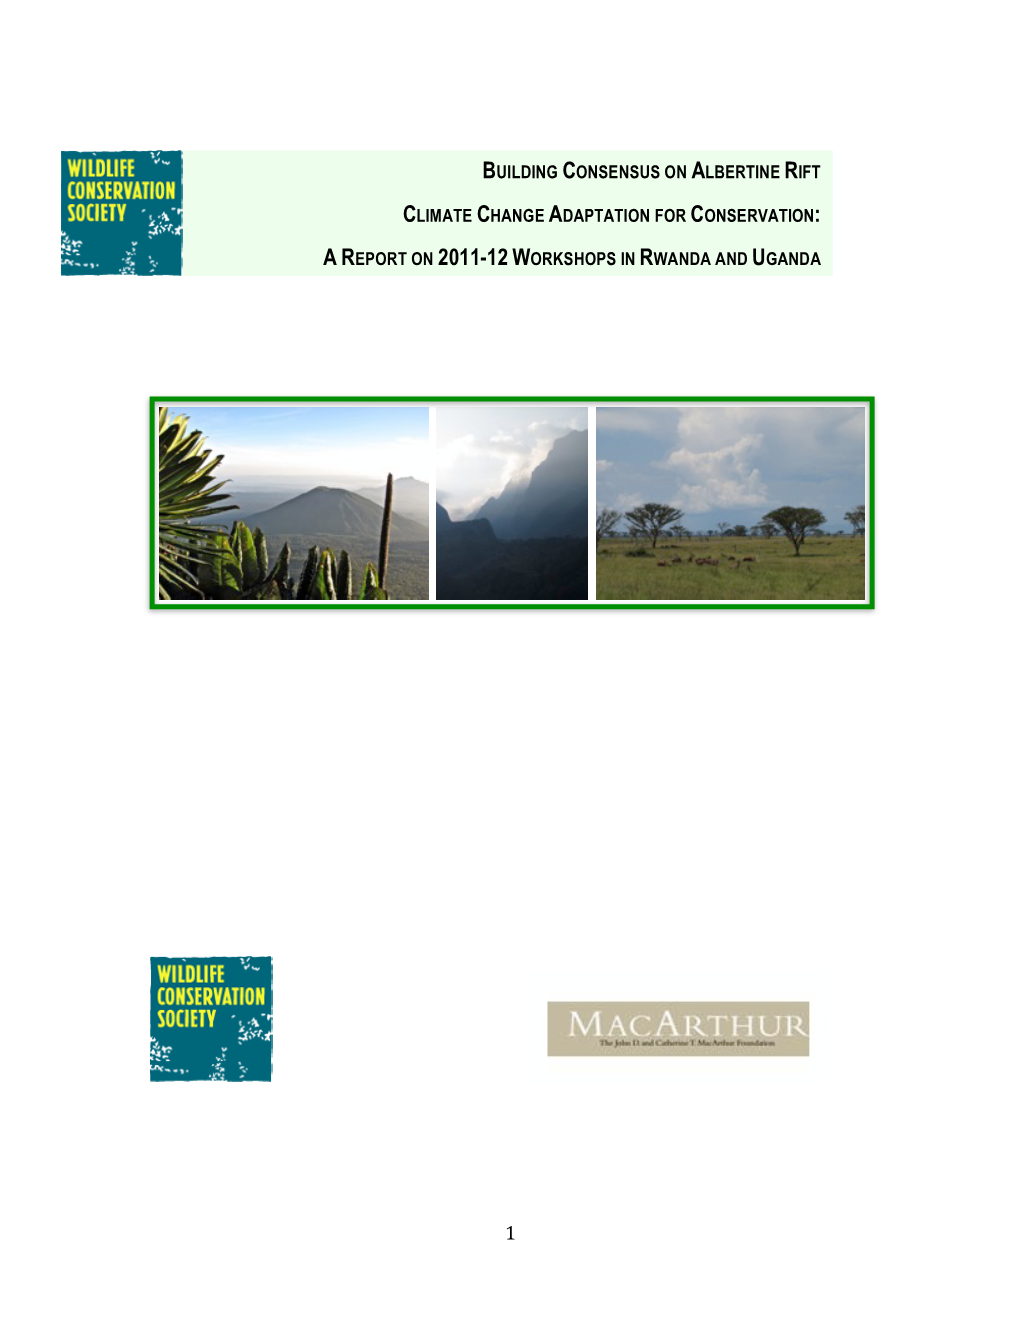 Building Consensus on Albertine Rift Climate Change Adaptation for Conservation: a Report on 2011-12 Workshops in Uganda and Rwanda